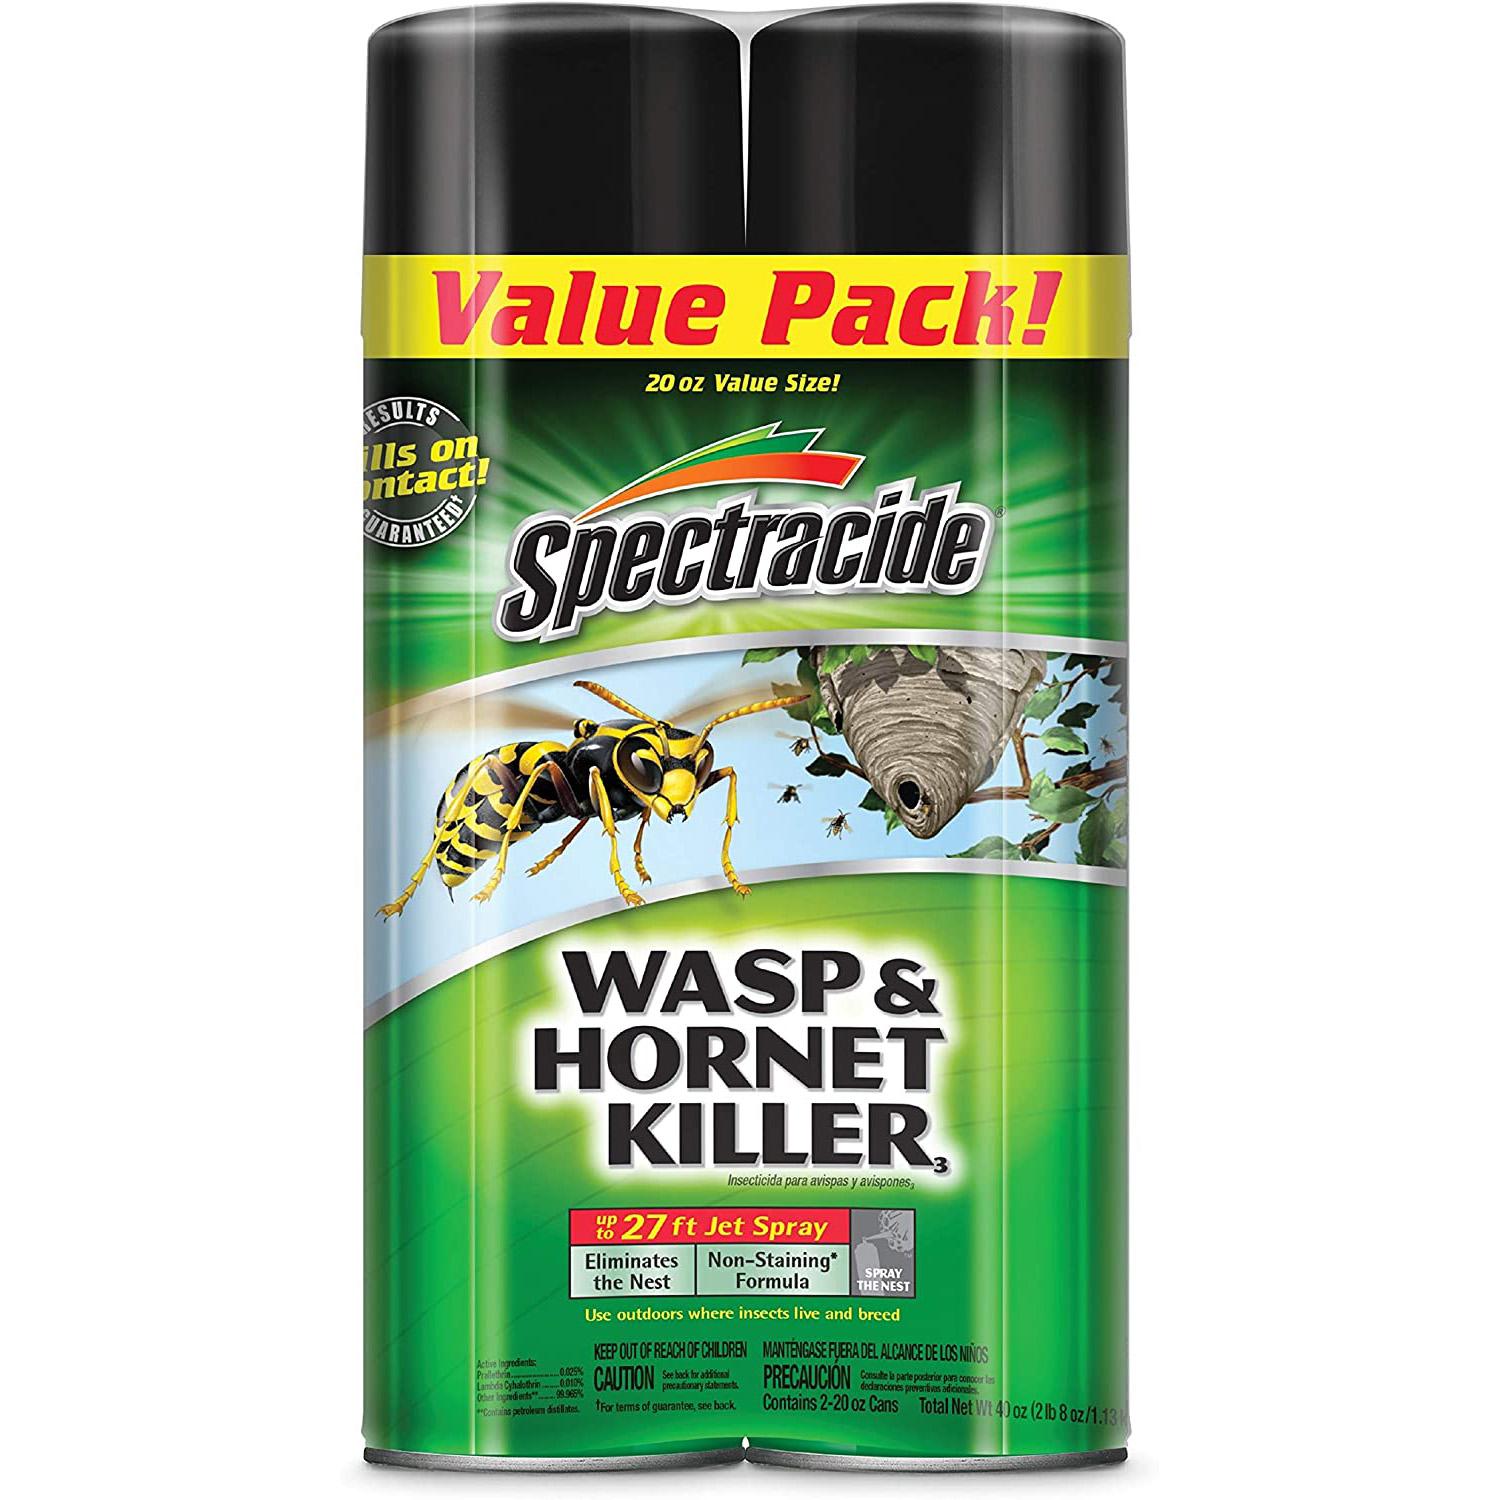 2 Spectracide Wasp and Hornet Killer Spray for $5.37